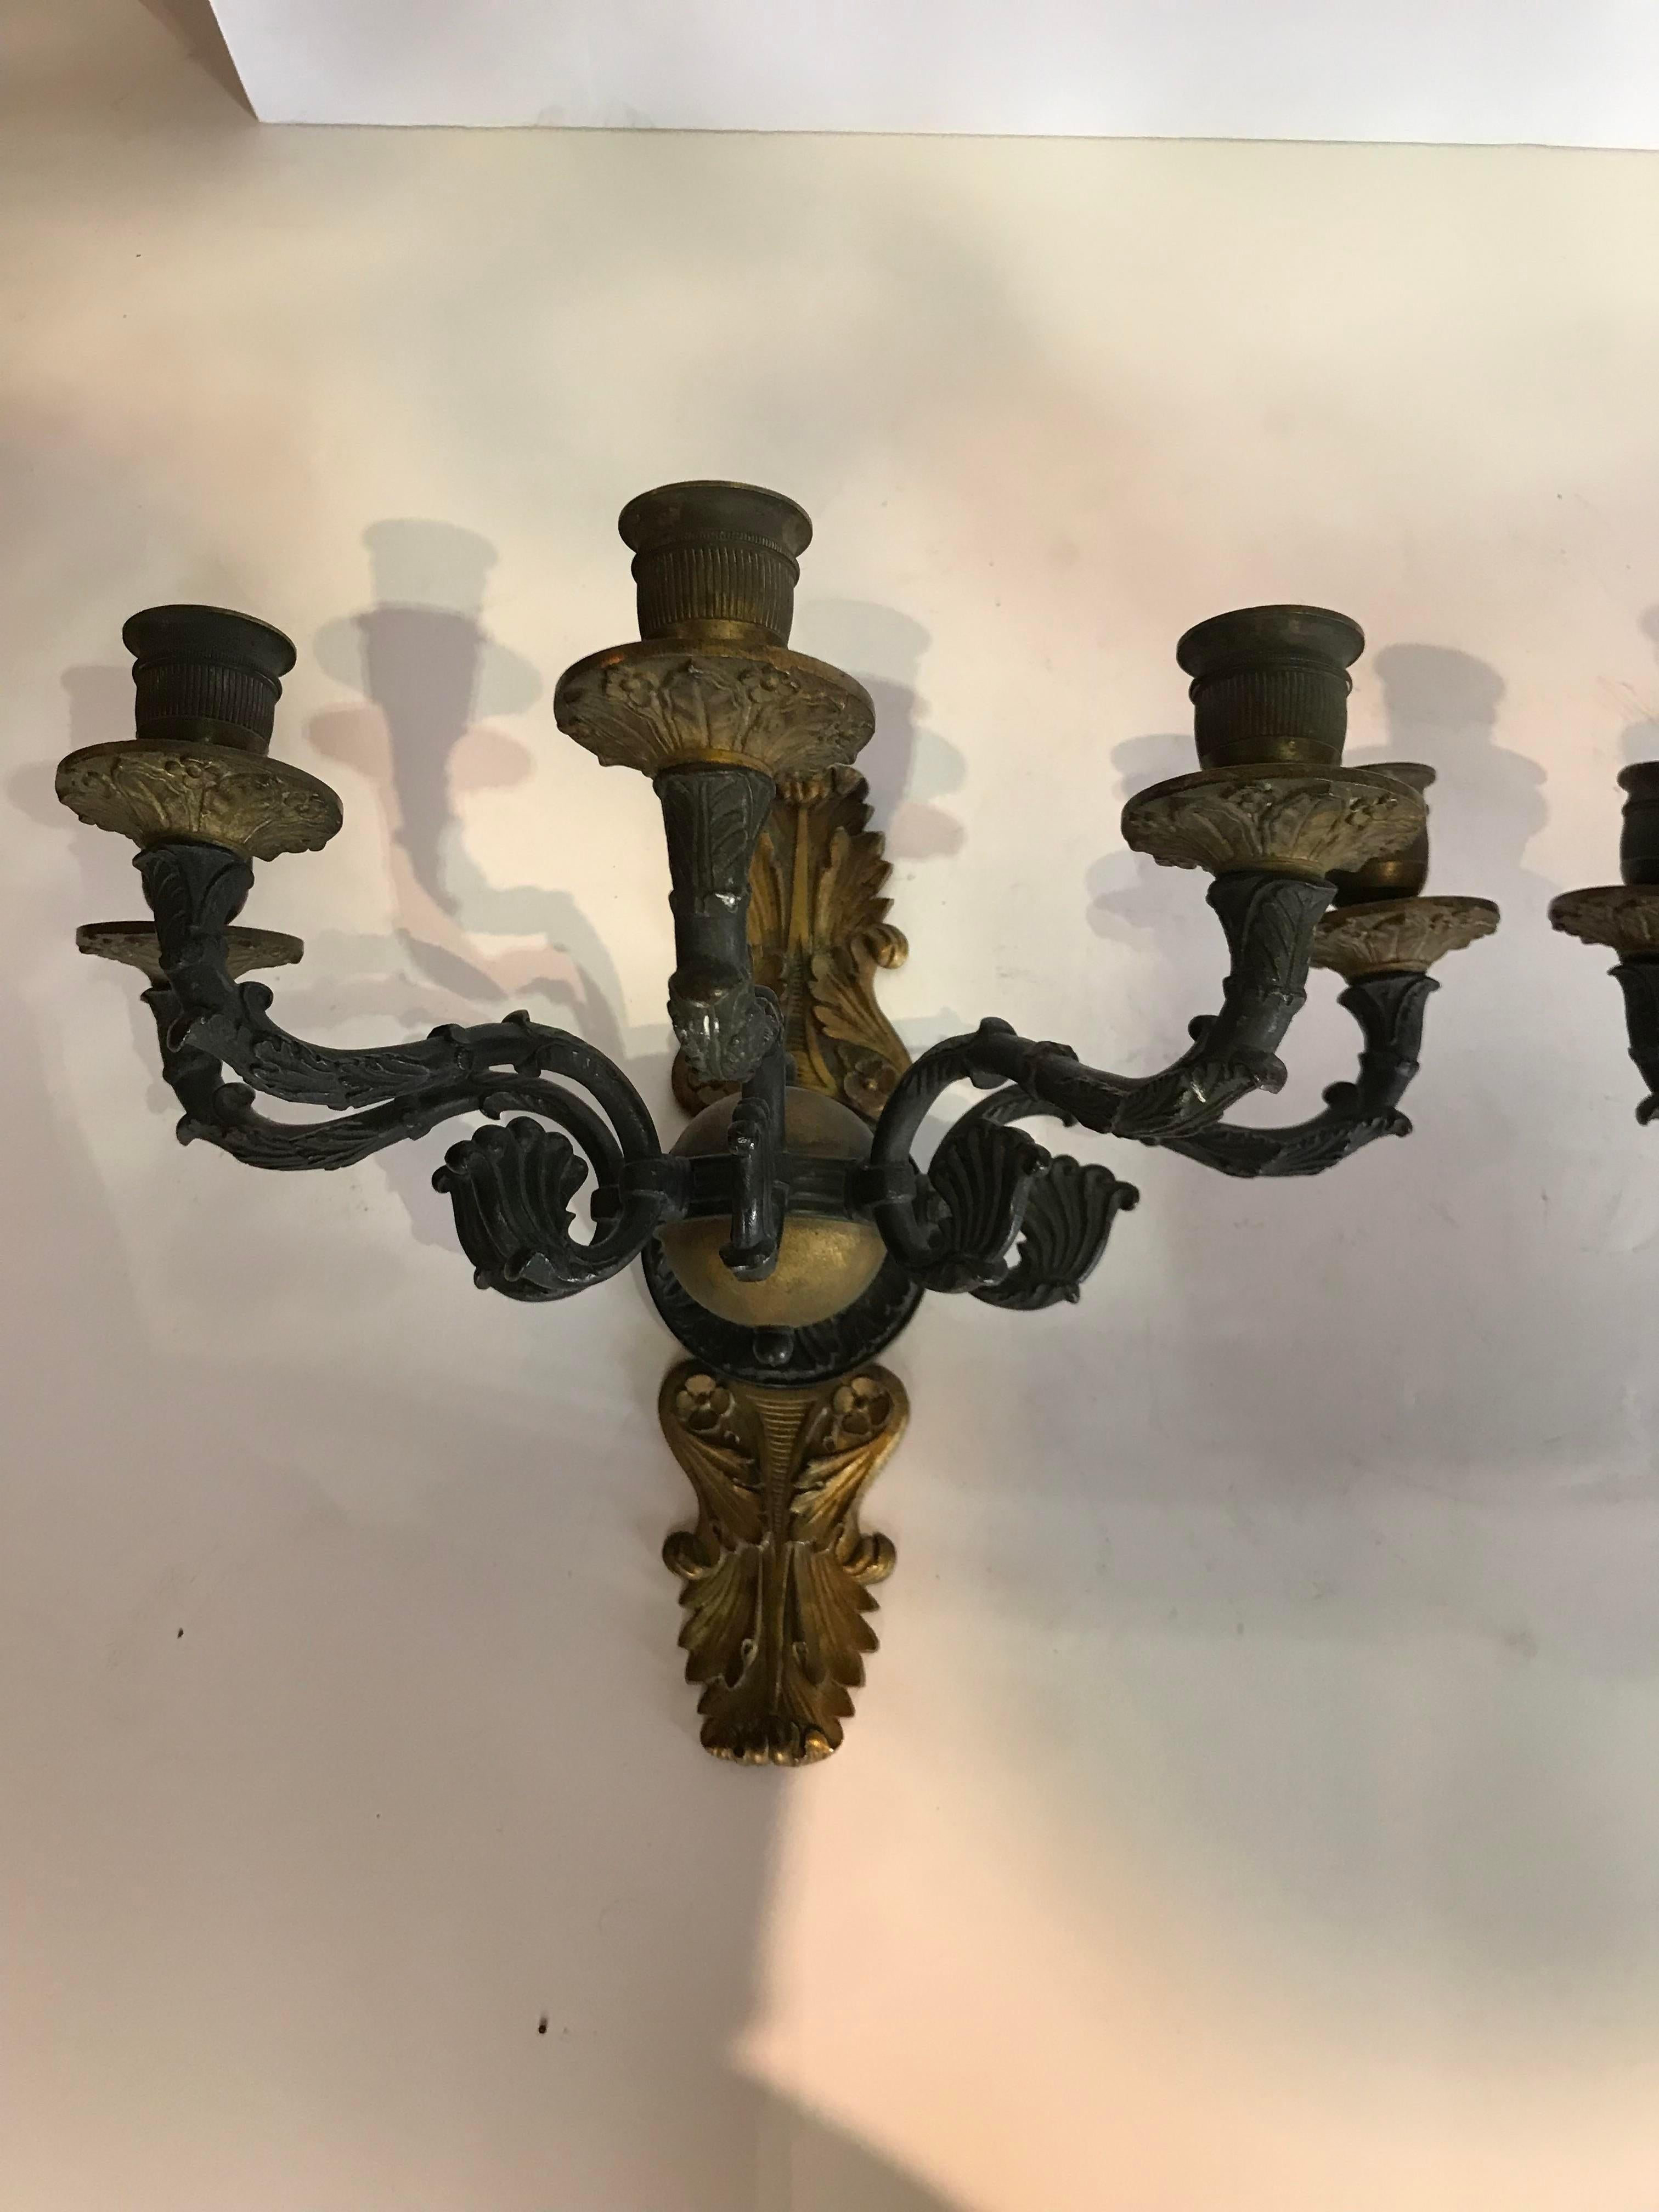 Bronze empire candle sconces. These sconces are the best quality. They are for candles but can be wired.